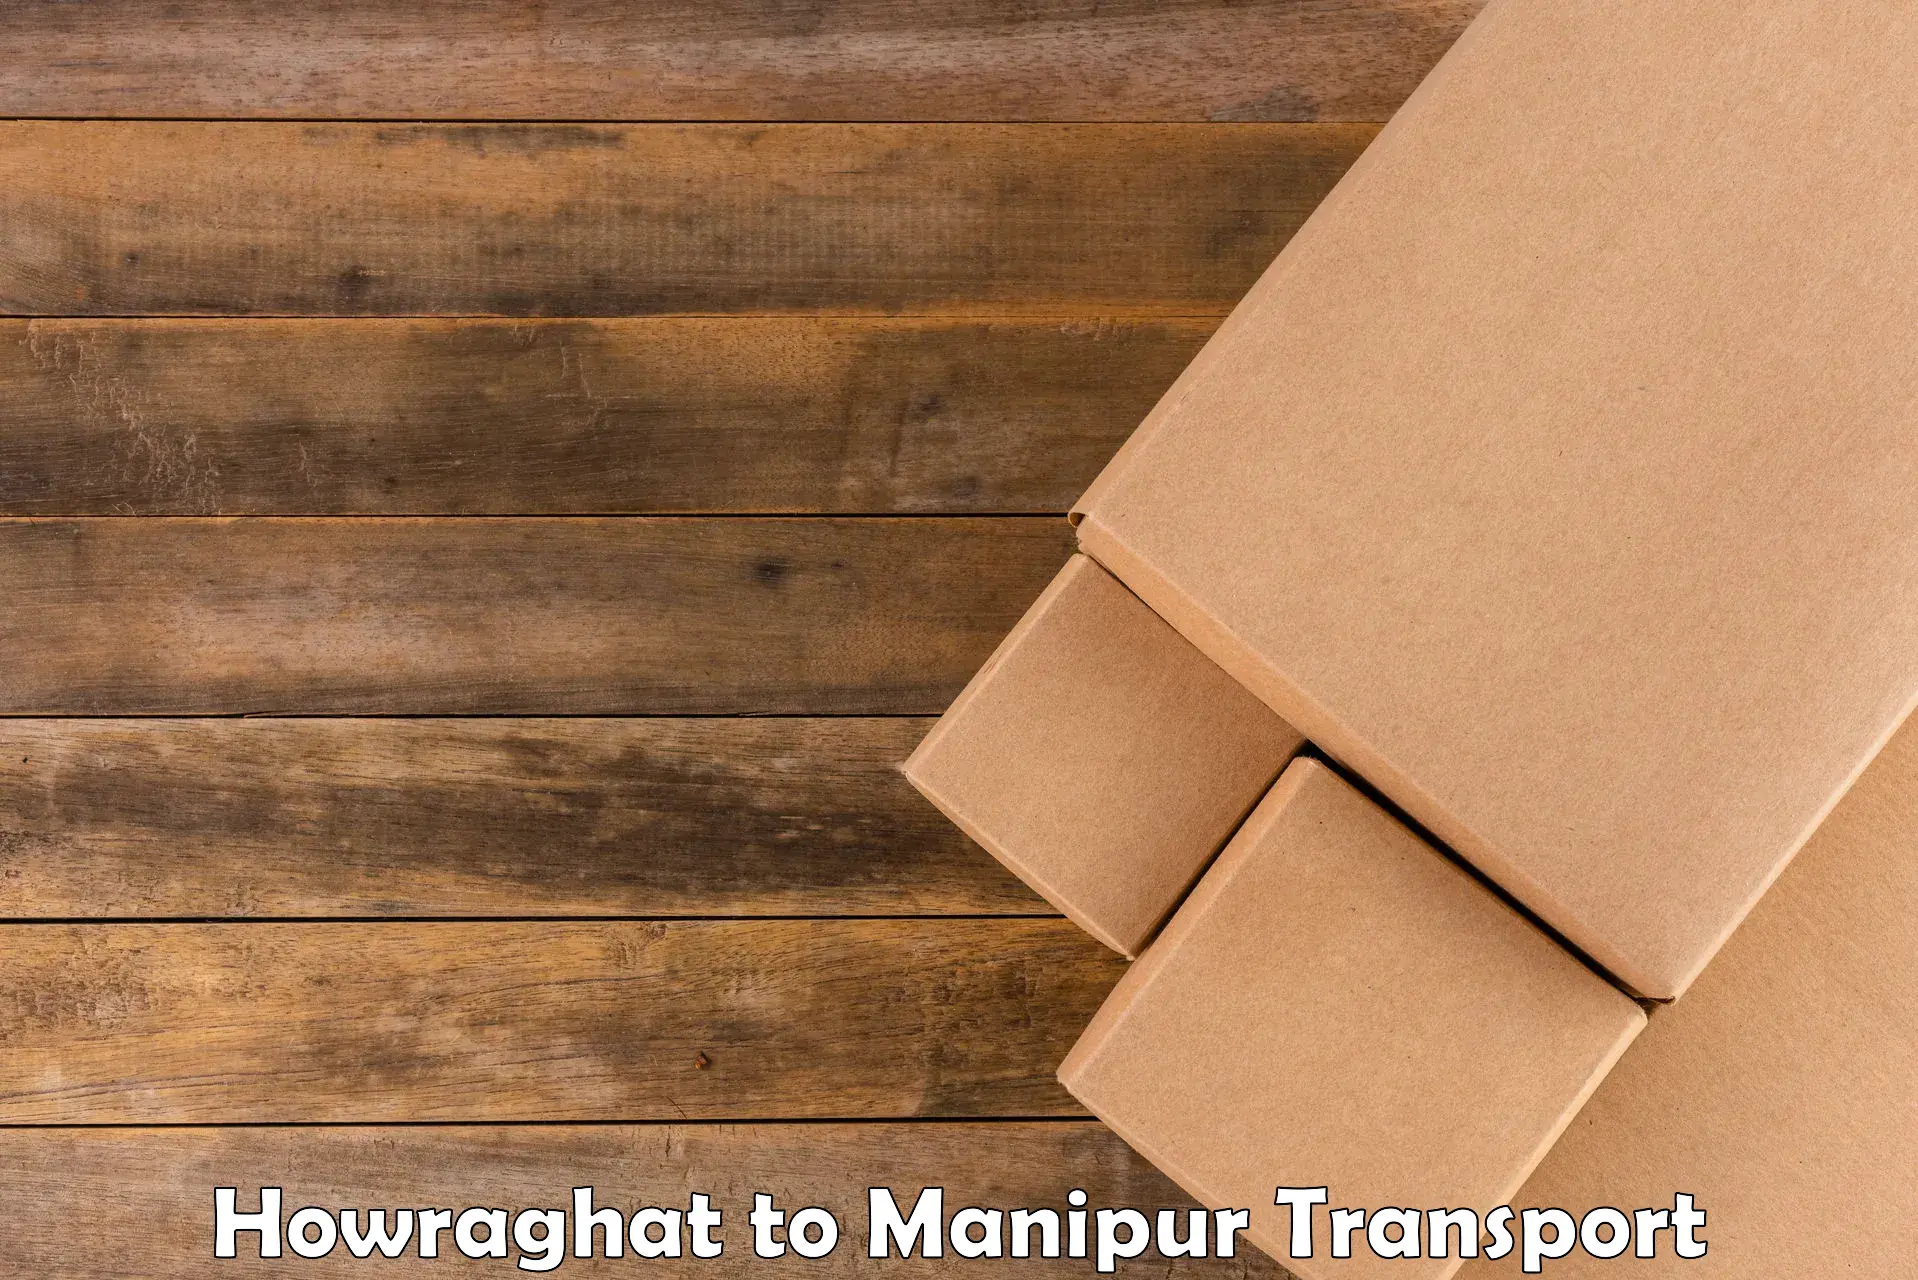 Domestic goods transportation services Howraghat to Manipur